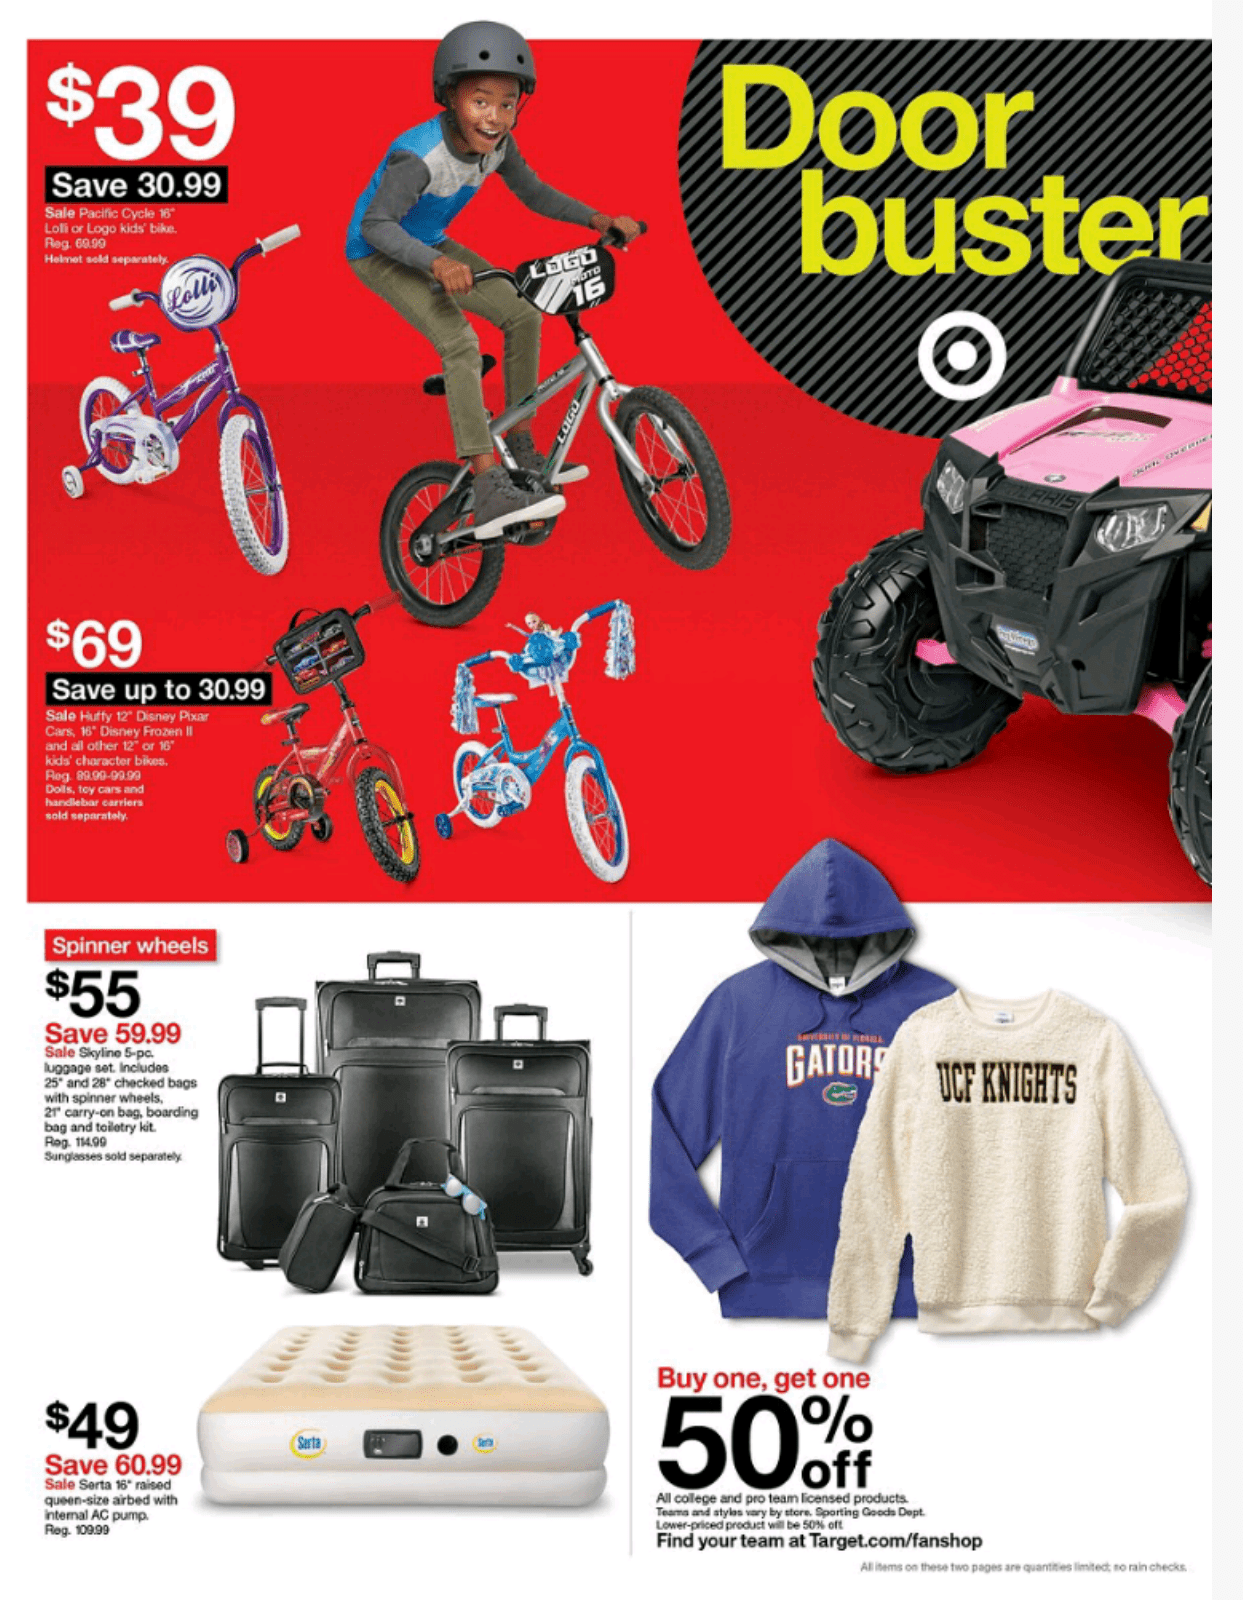 It’s Here! 2019 Target Black Friday Ad Preview - Page 7 of 13 - www.bagssaleusa.com